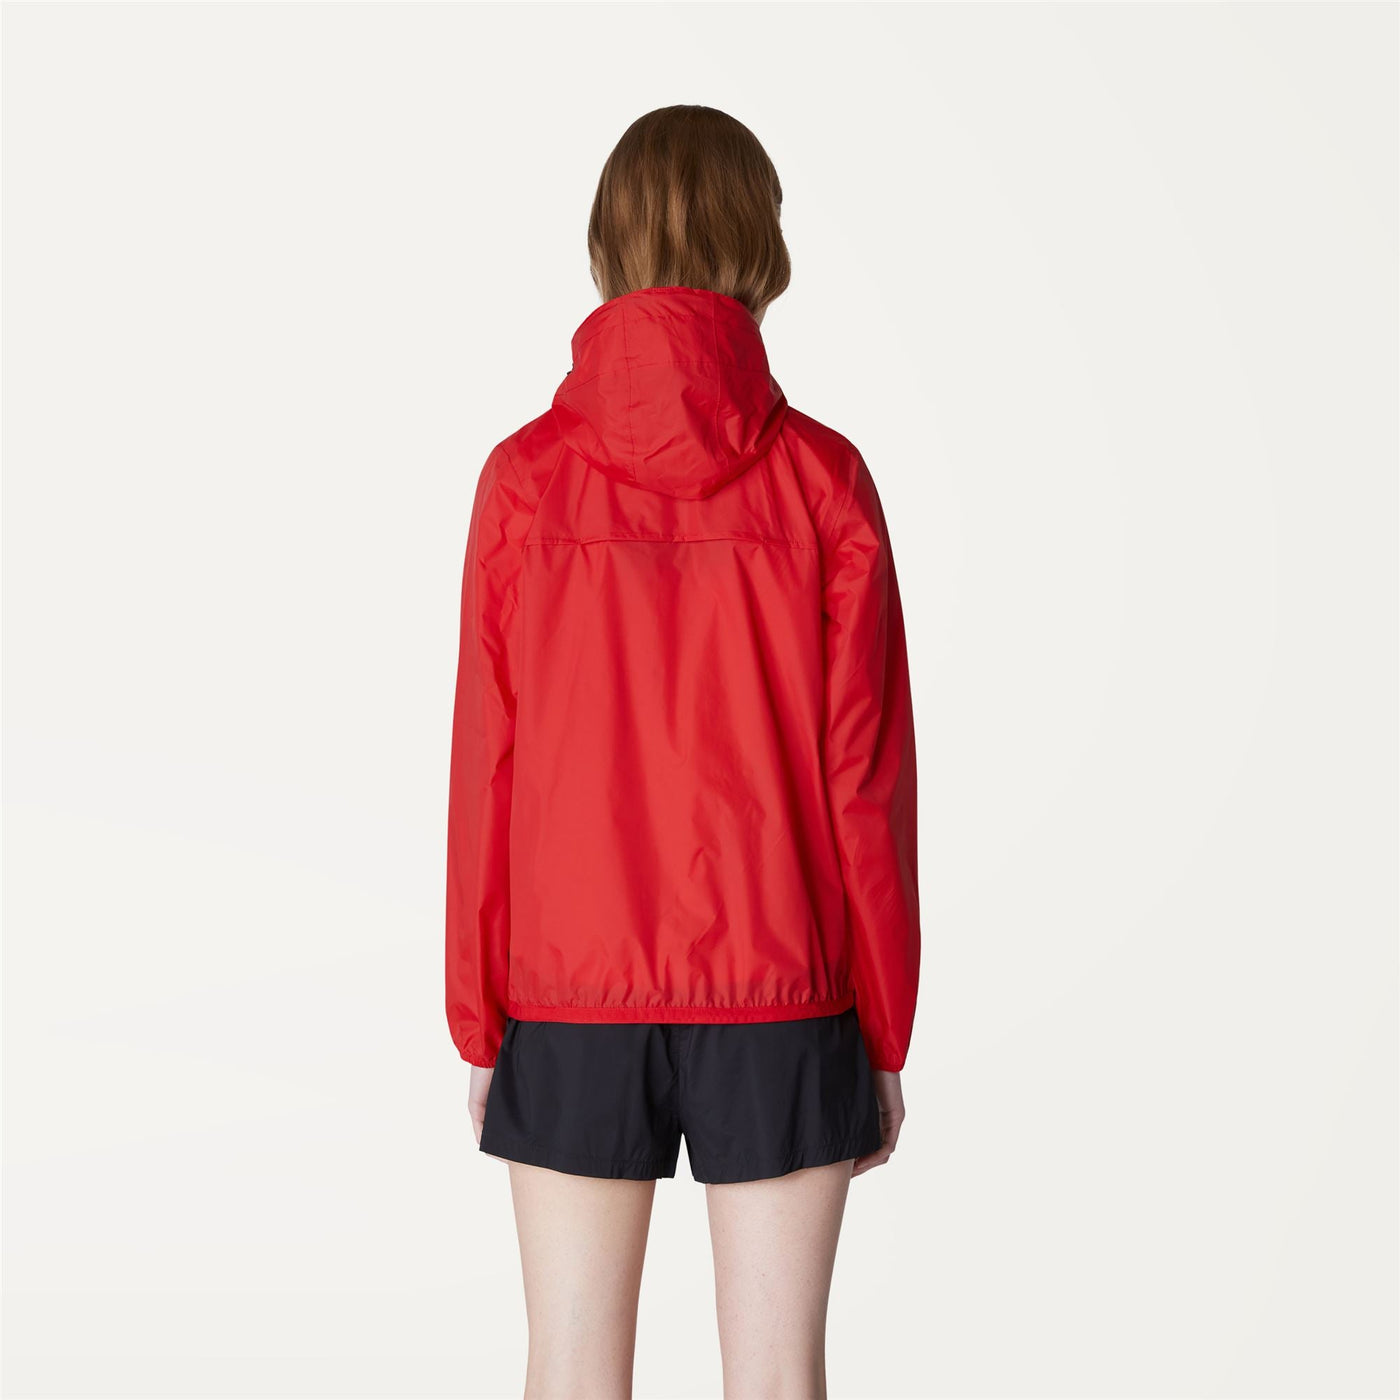 Jackets Woman LE VRAI 3.0 Claudette Mid Red | K-Way Dressed Front Double		